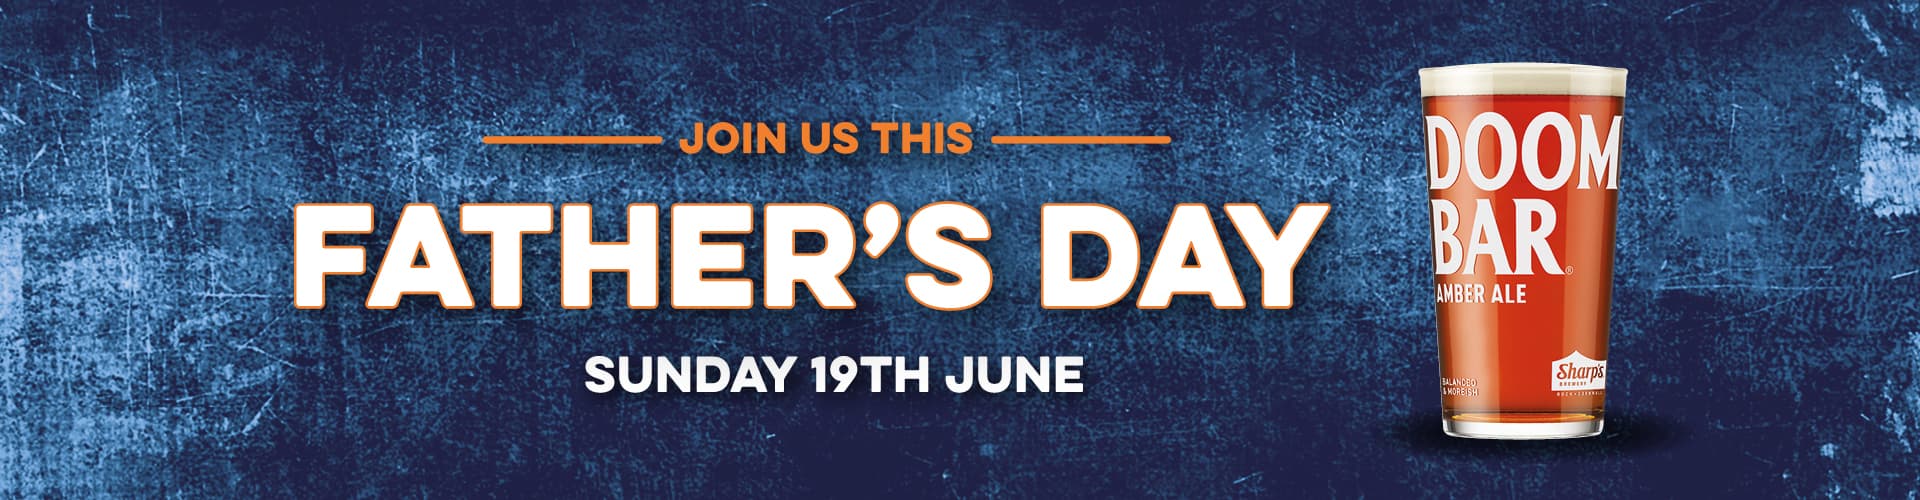 Father's Day at The English Lounge pub in Manchester